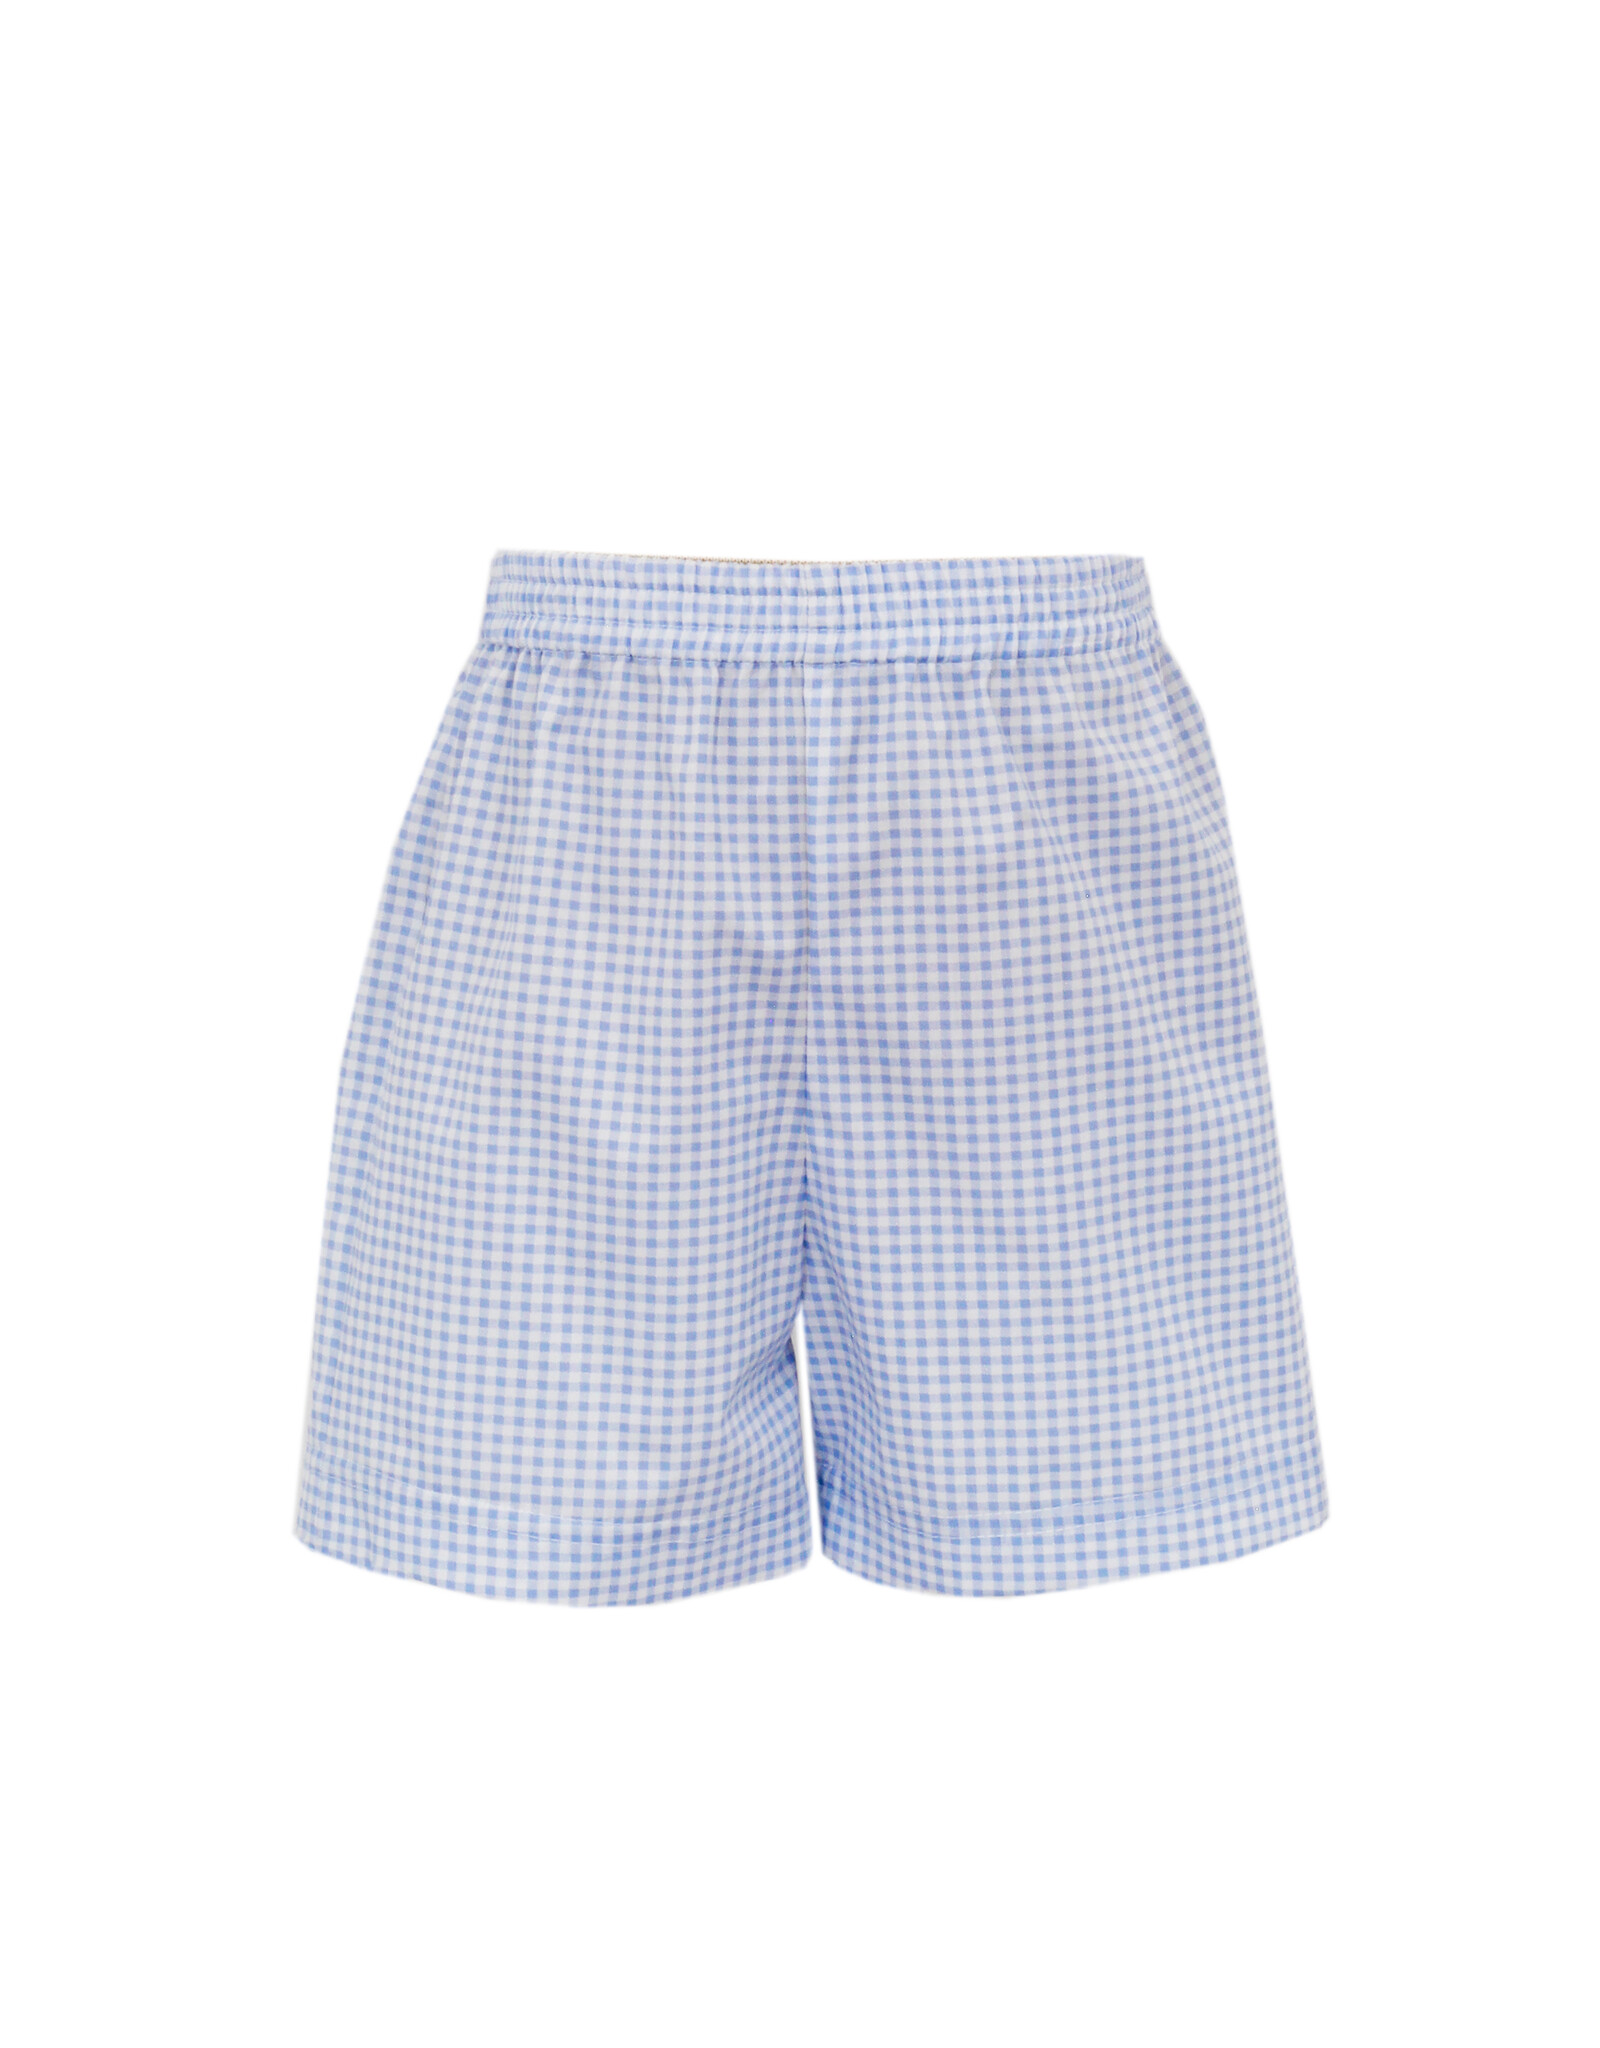 Claire and Charlie Blue Gingham Boys Shorts